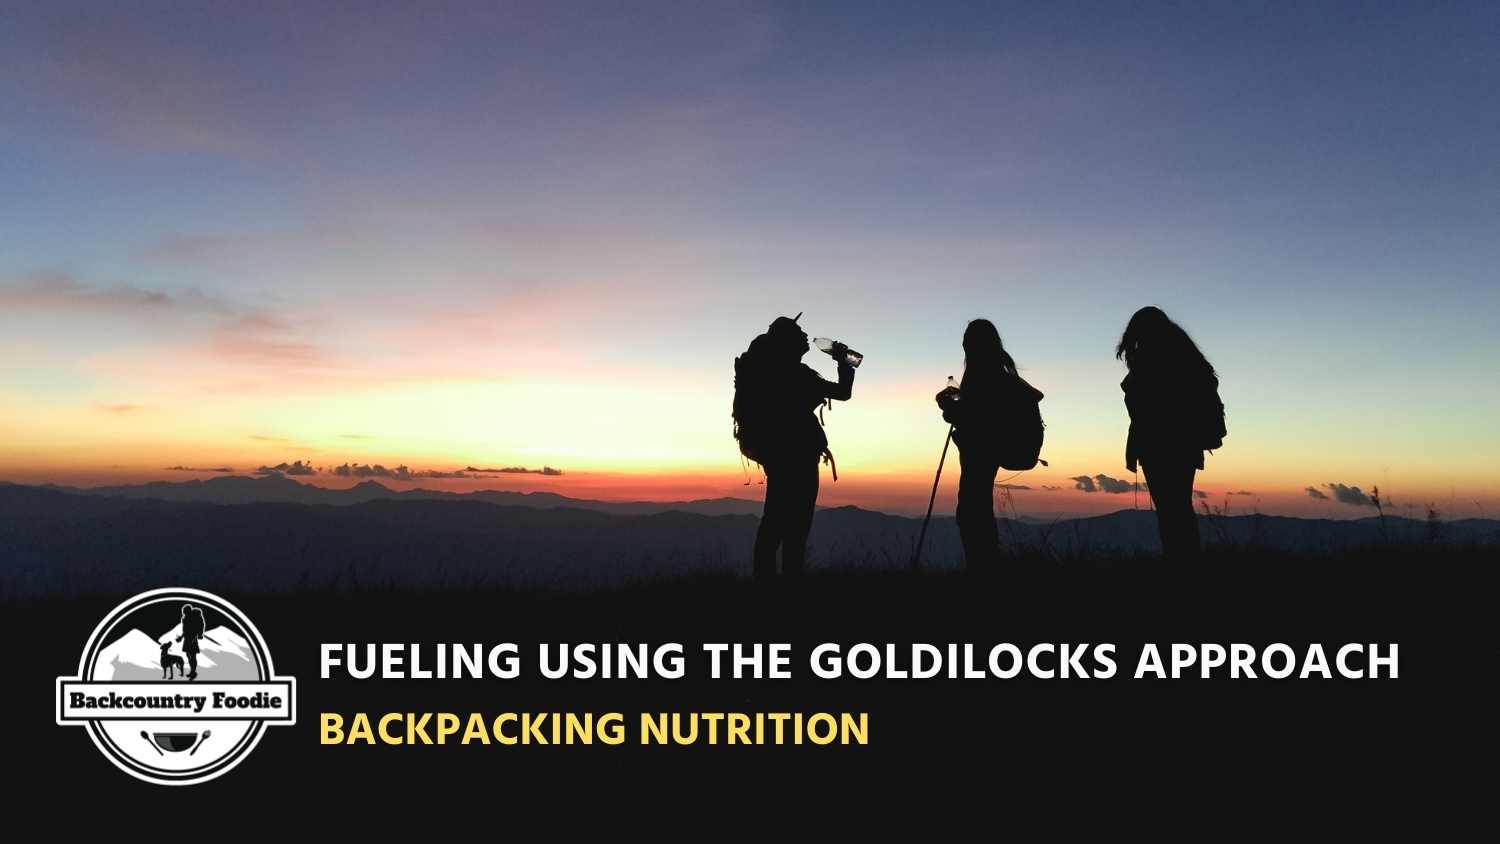 Backcountry Foodie Blog Fueling Further Using the Goldilocks Approach Backpacking Nutrition